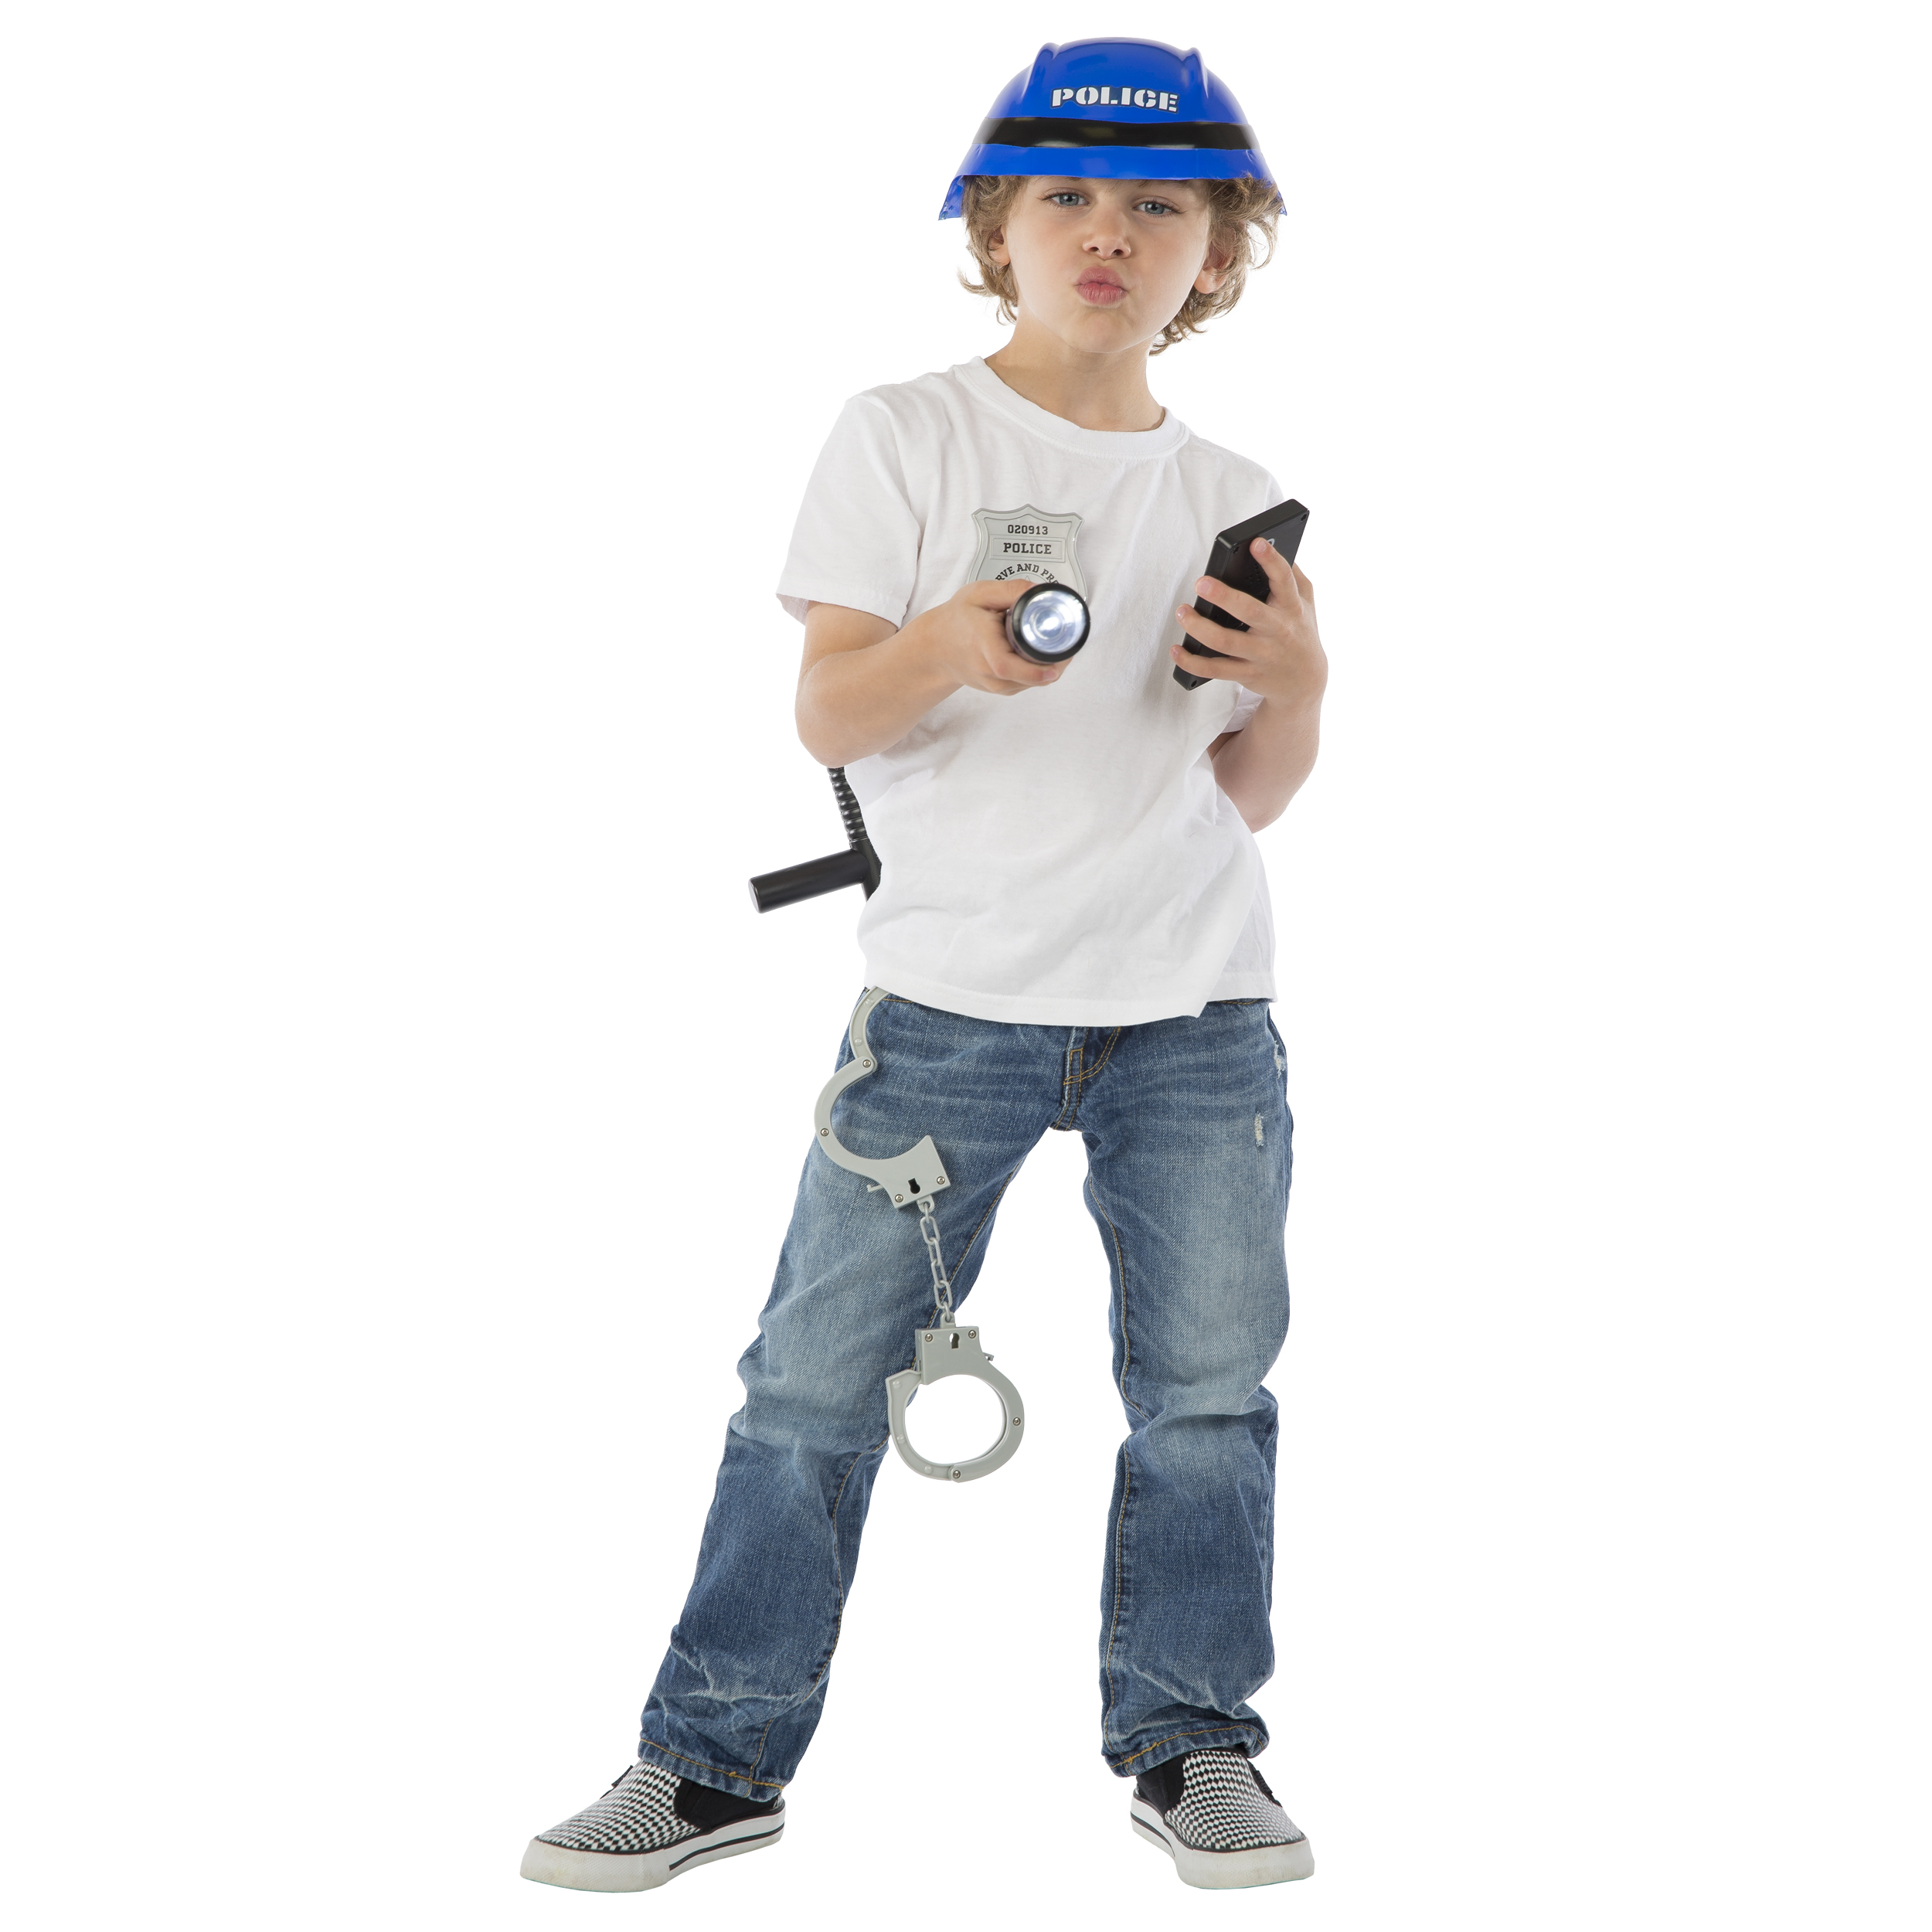 PoliceOfficer RolePlay Kid2 Chicago Website Design SEO Company